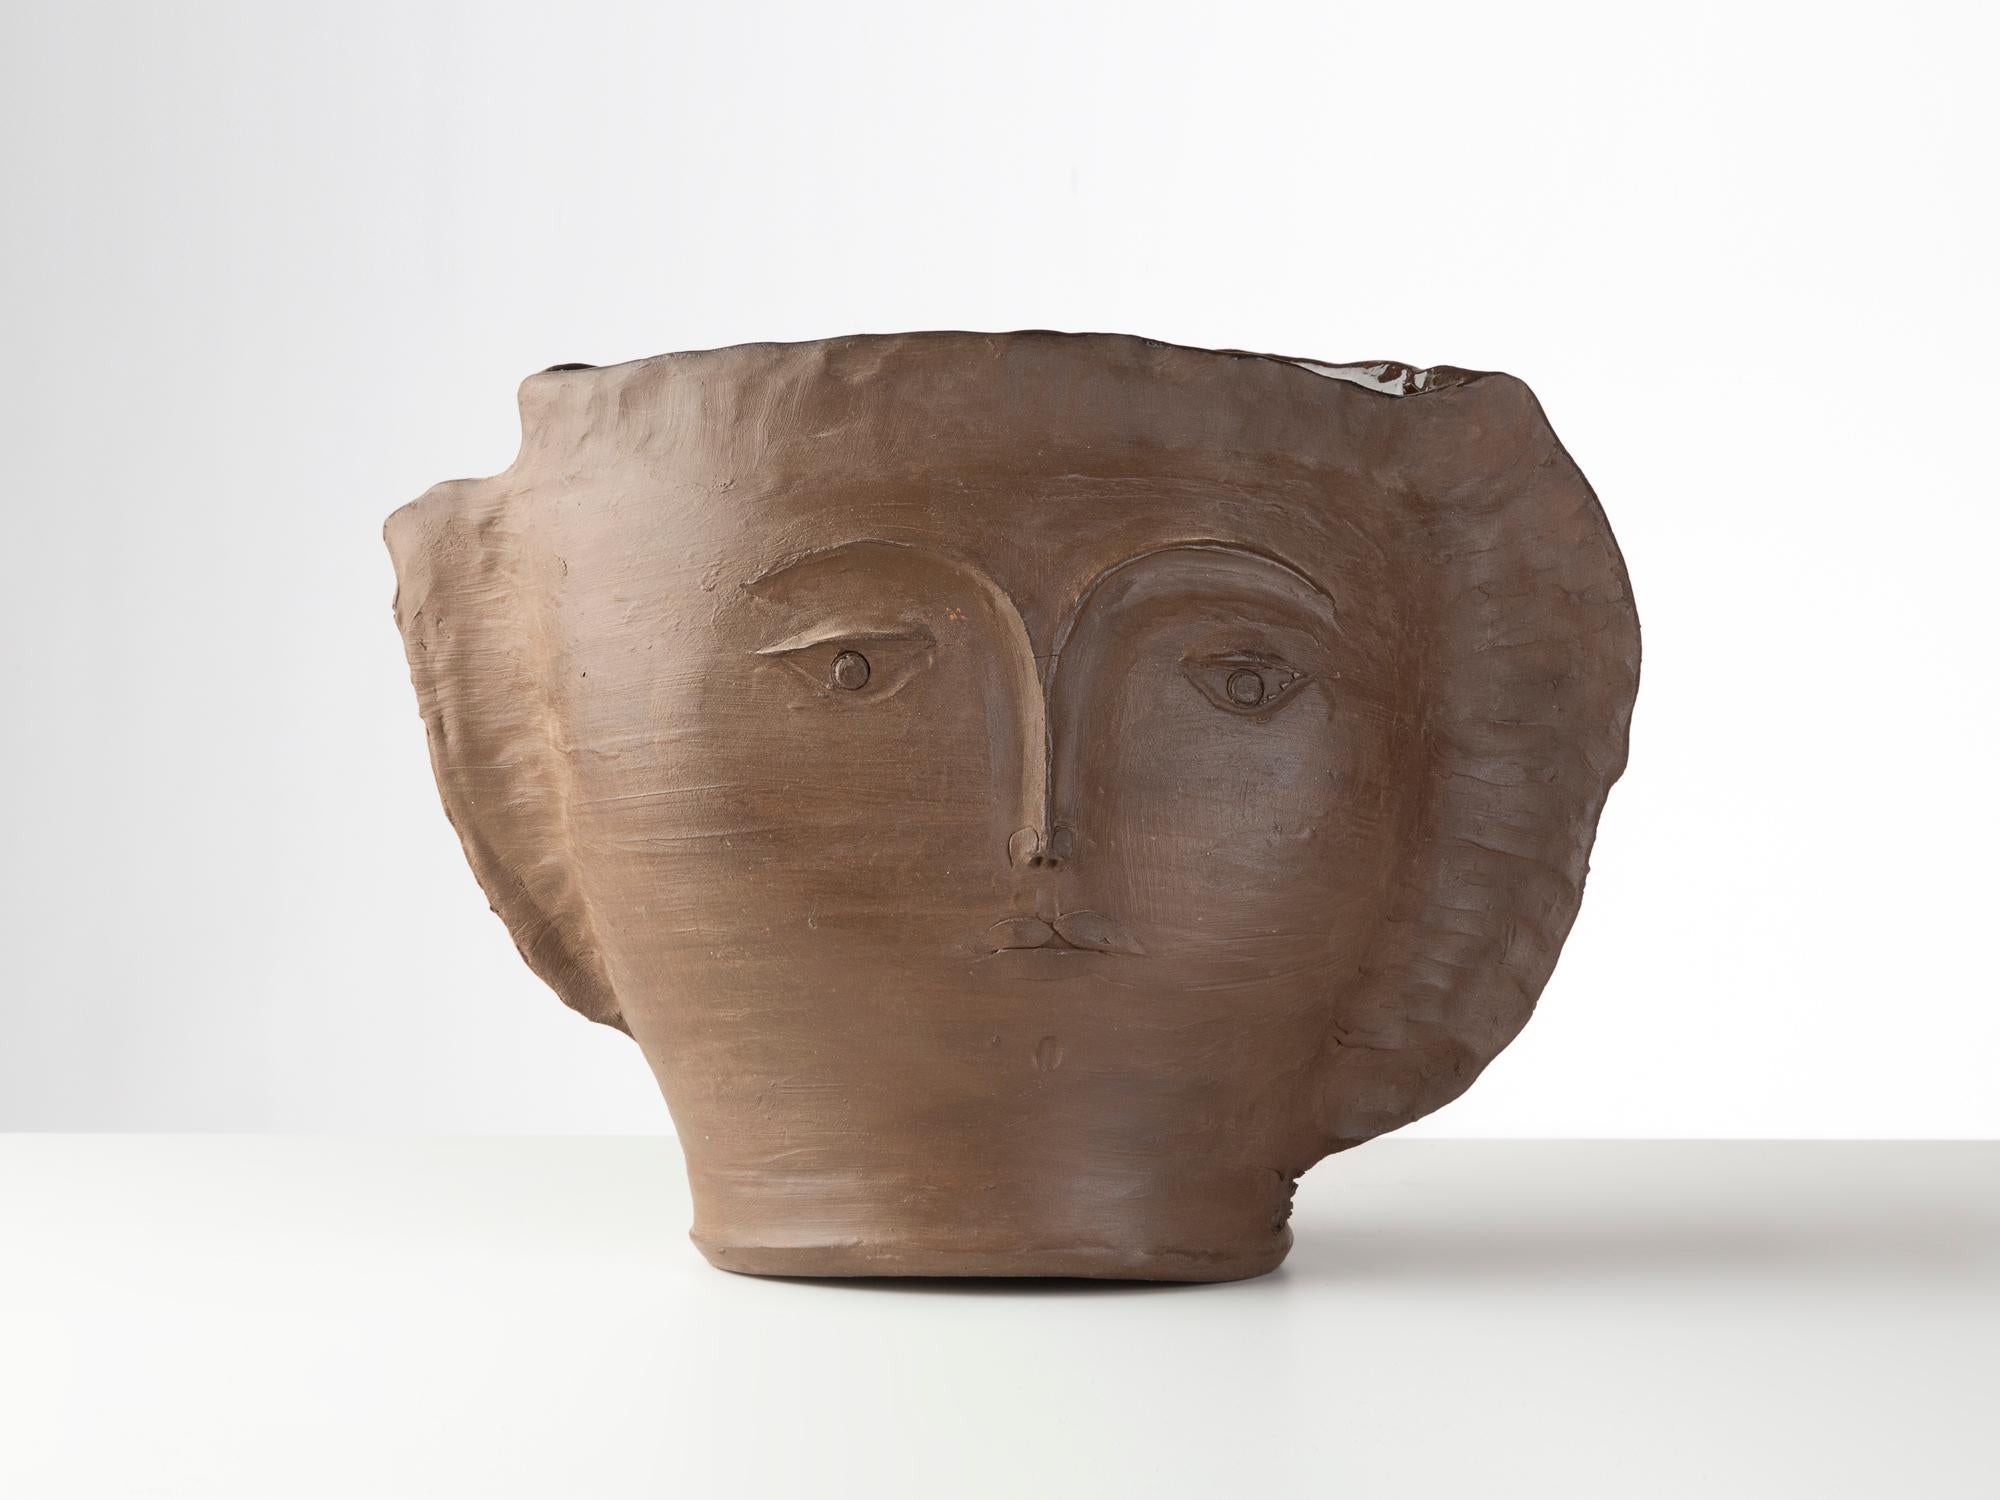 Unique piece.
Brown glazed ceramic.
Double-sided, each with a different face.
Signed on base : Cloutier RJ.